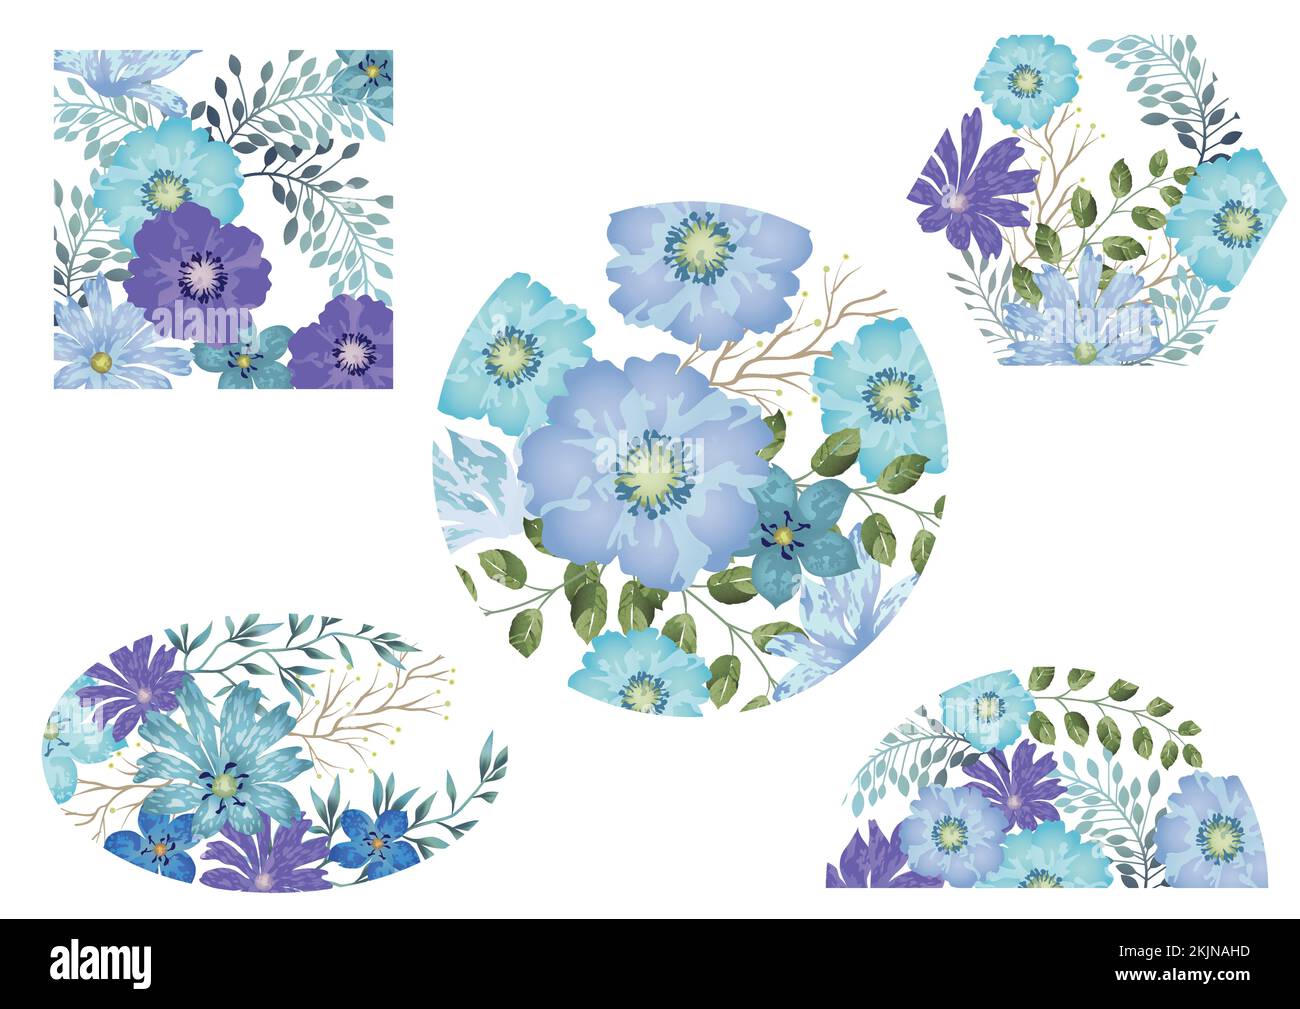 Set Of Watercolor Floral Backgrounds Isolated On A White Background. Vector Illustration. Stock Vector